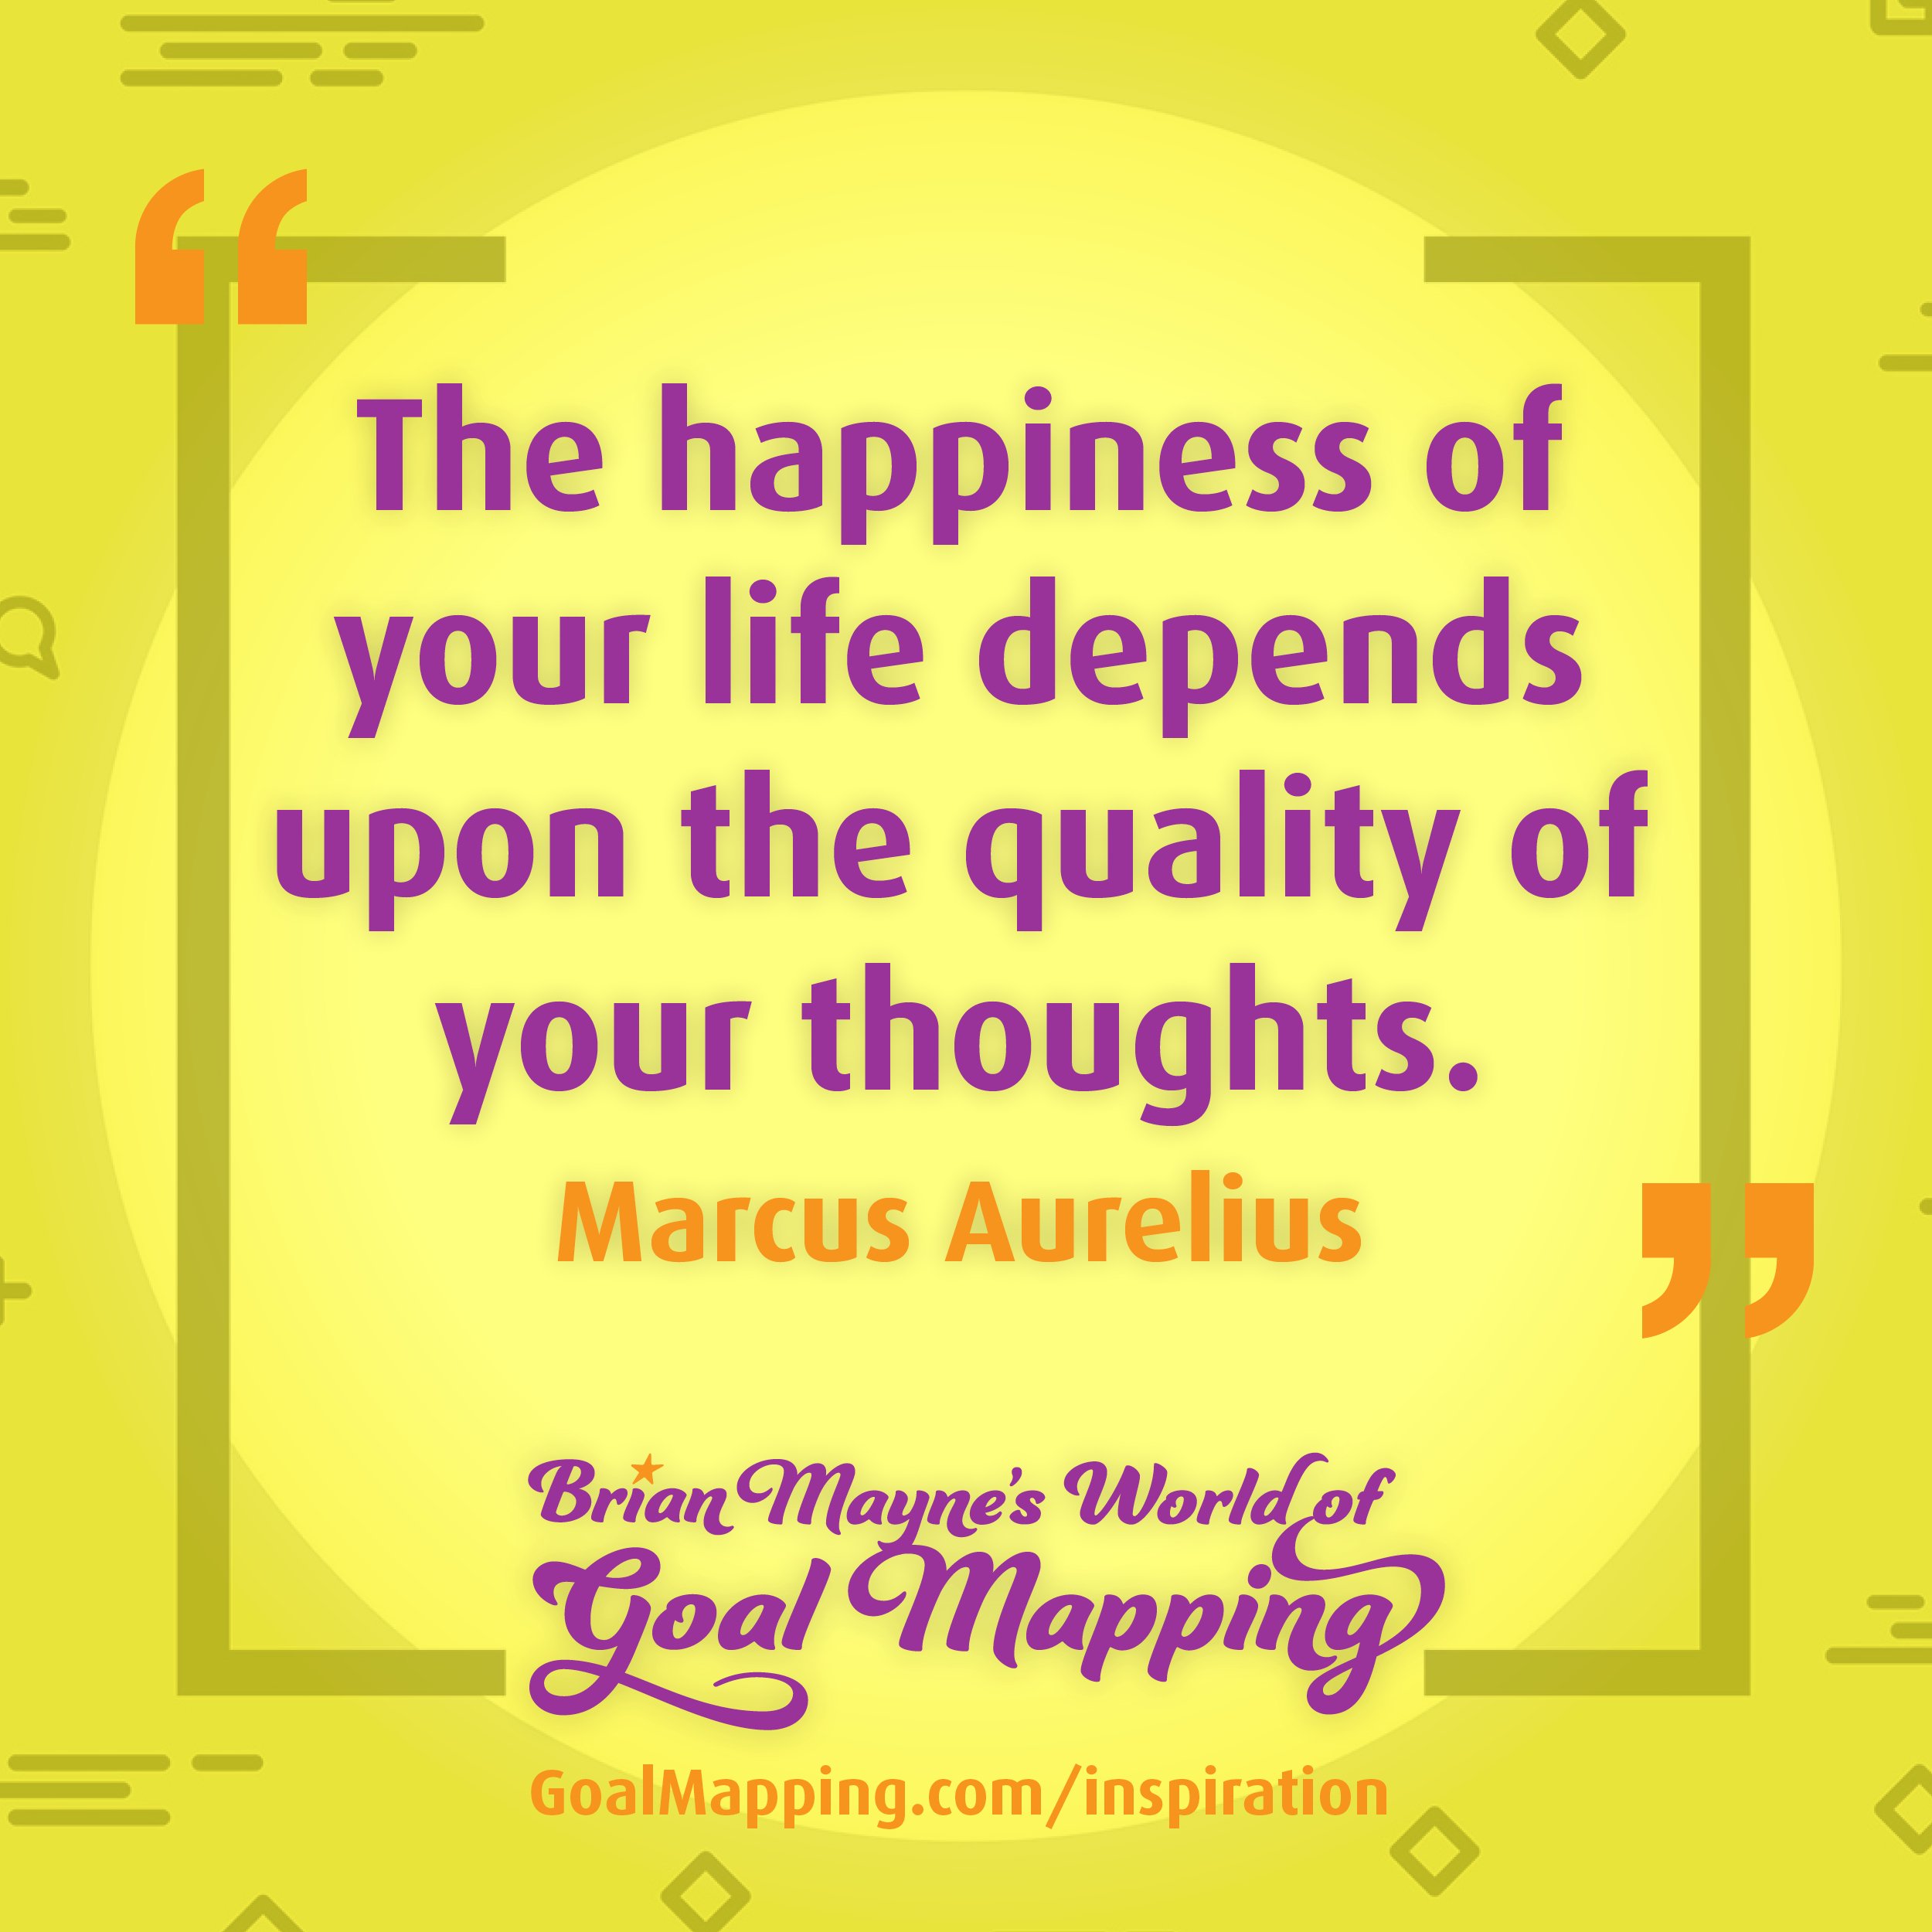 "The happiness of your life depends upon the quality of your thoughts." Marcus Aurelius